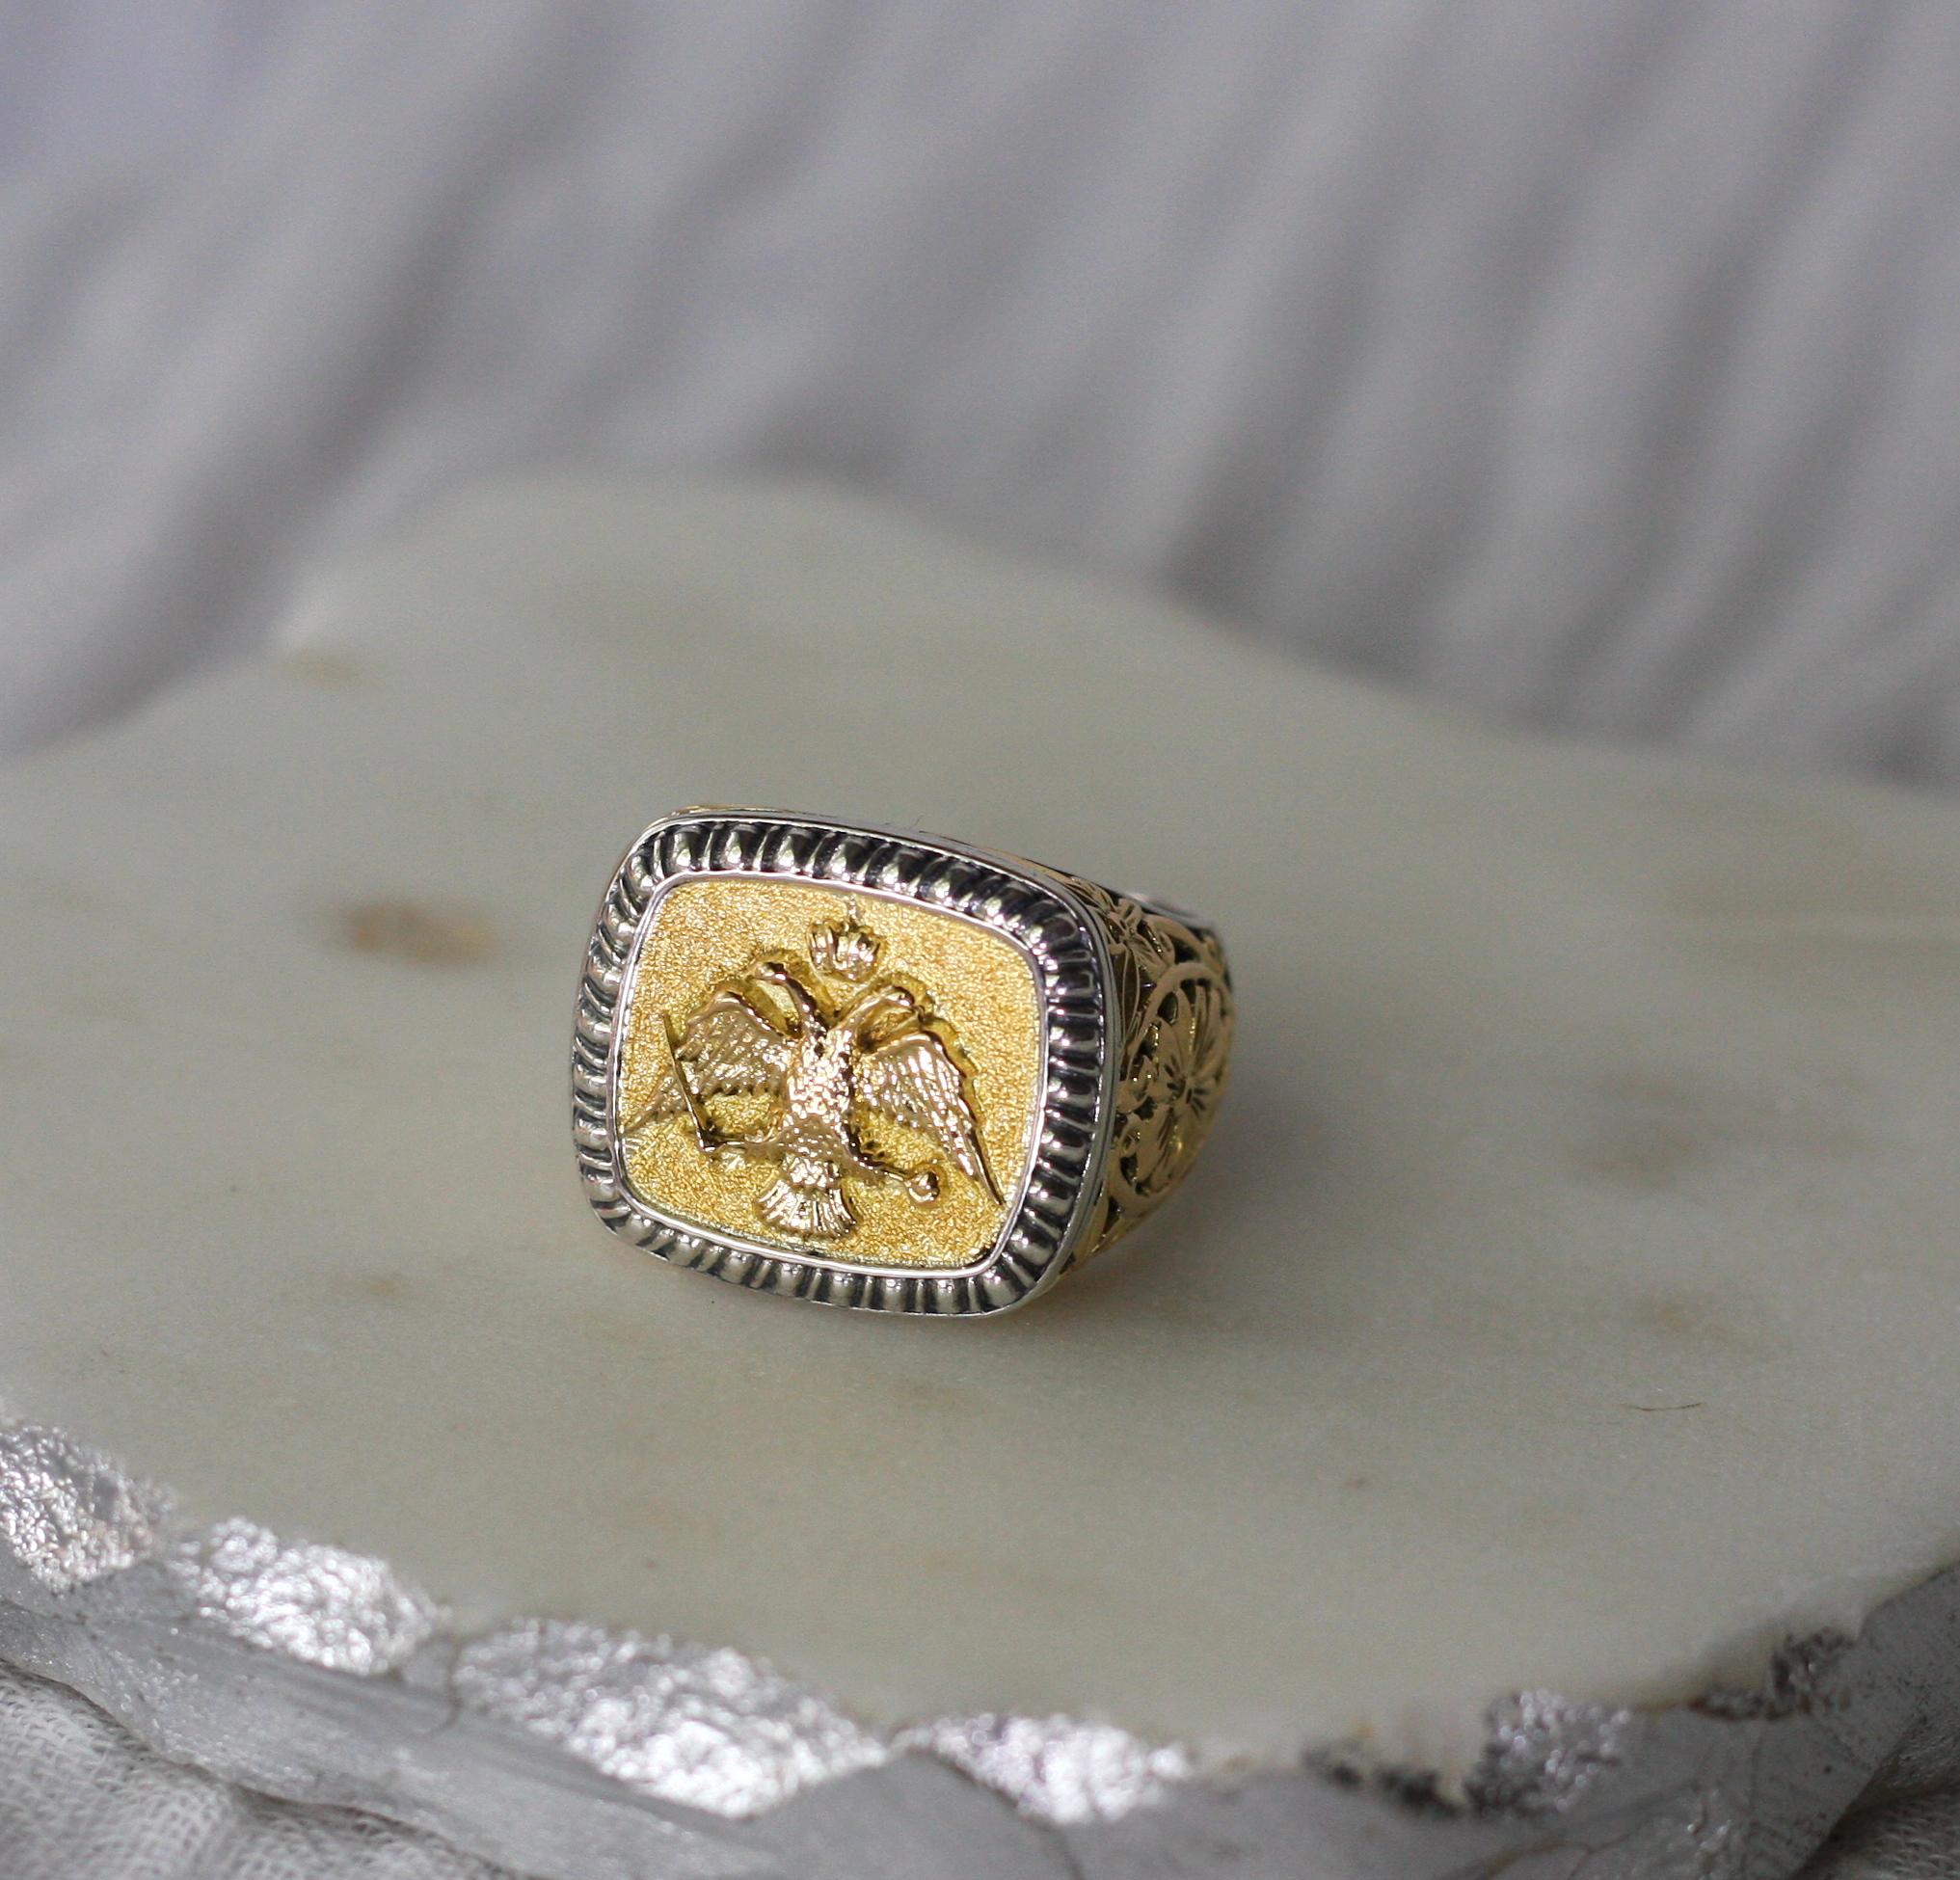 Presenting all handmade heavy decorated men's ring crafted from sterling silver and solid 18 Karat yellow gold to create a unique look. 
This gorgeous piece is outstanding in the quality of workmanship and is made in Amanatidis workshop in Athens